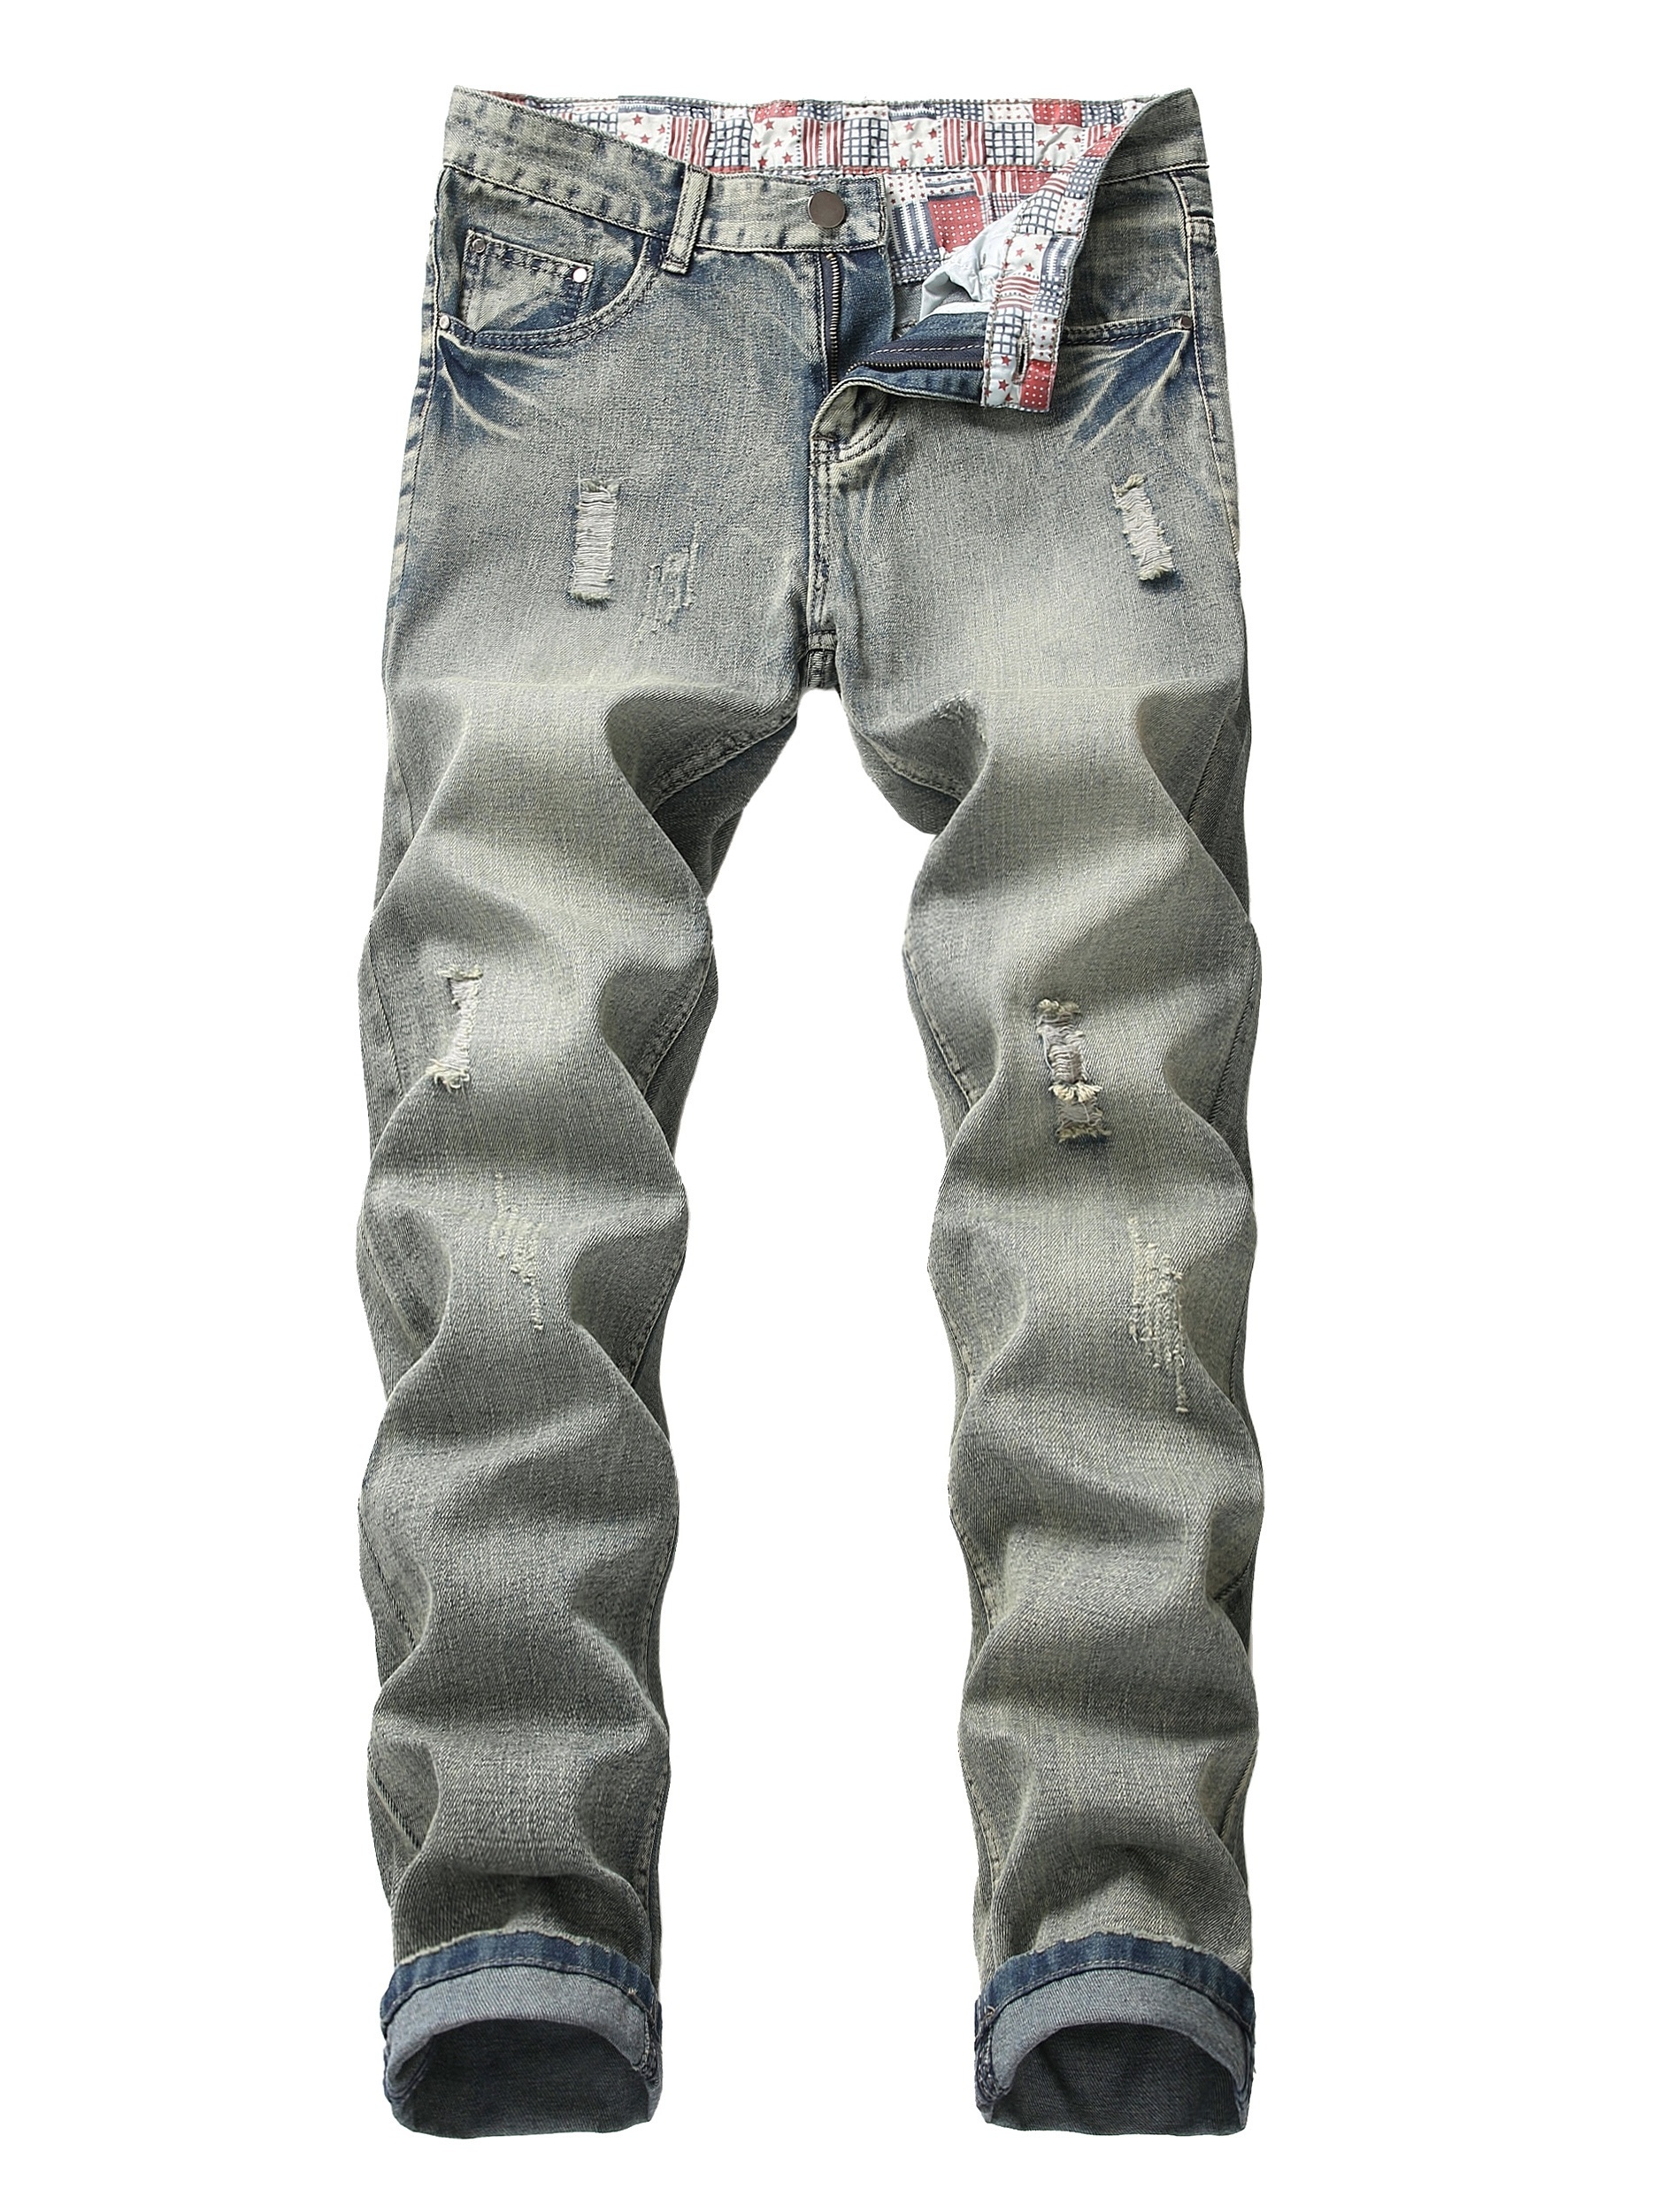 Men's Ripped Distressed Slim Straight Faded Light-colored Denim Jeans ...